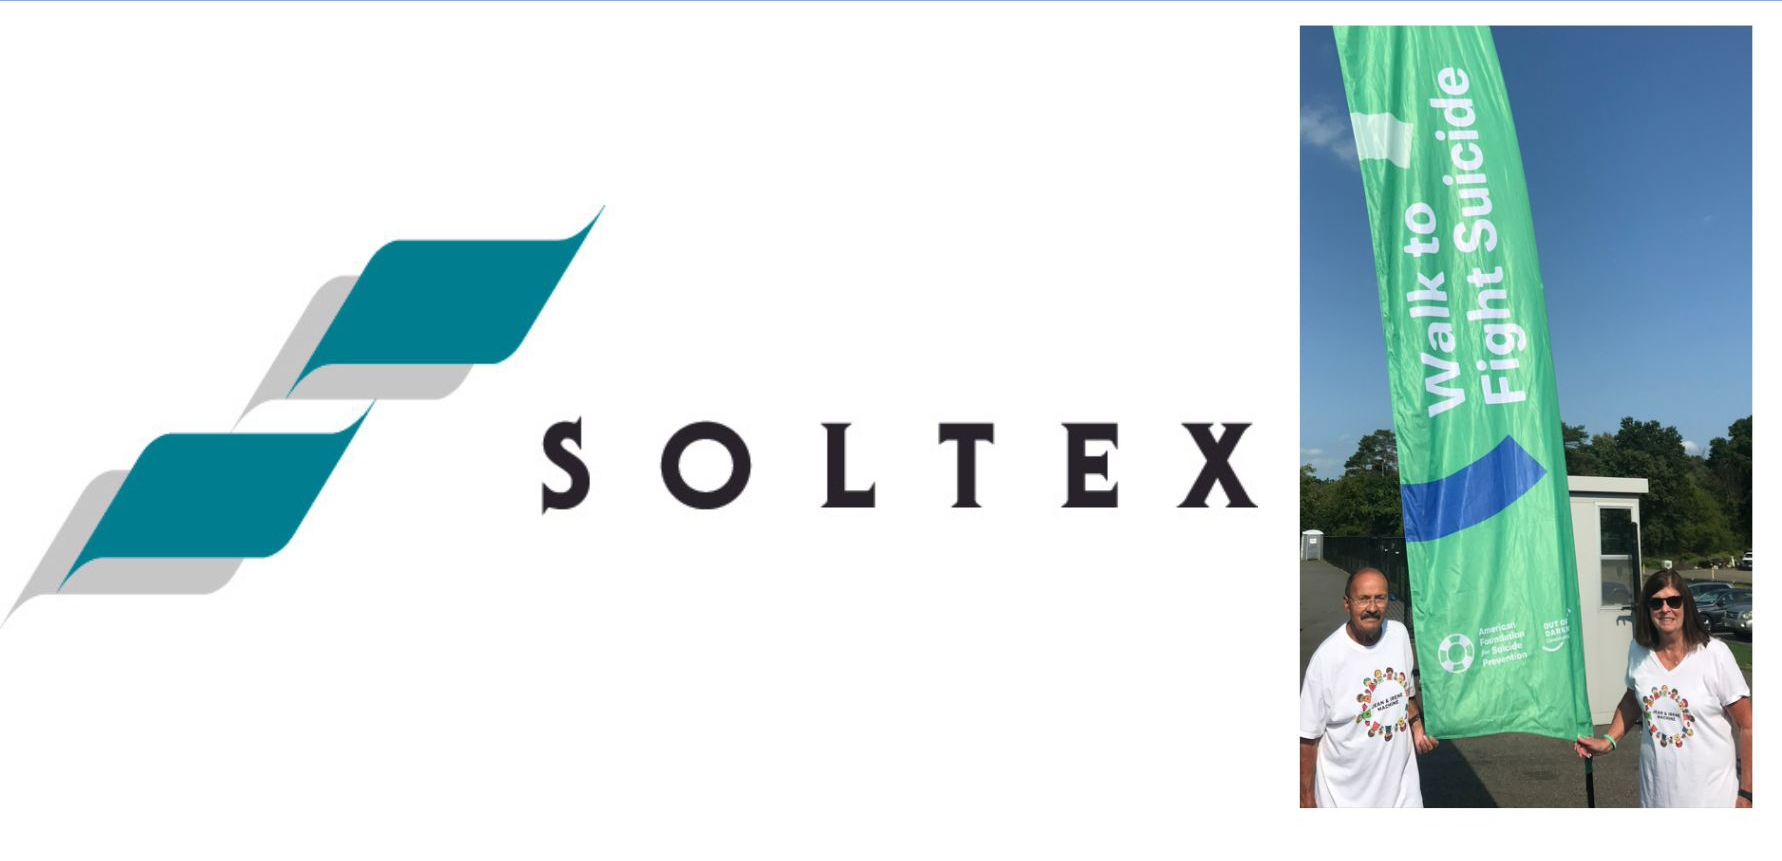 Soltex Employees raising awareness and funds for Suicide Prevention